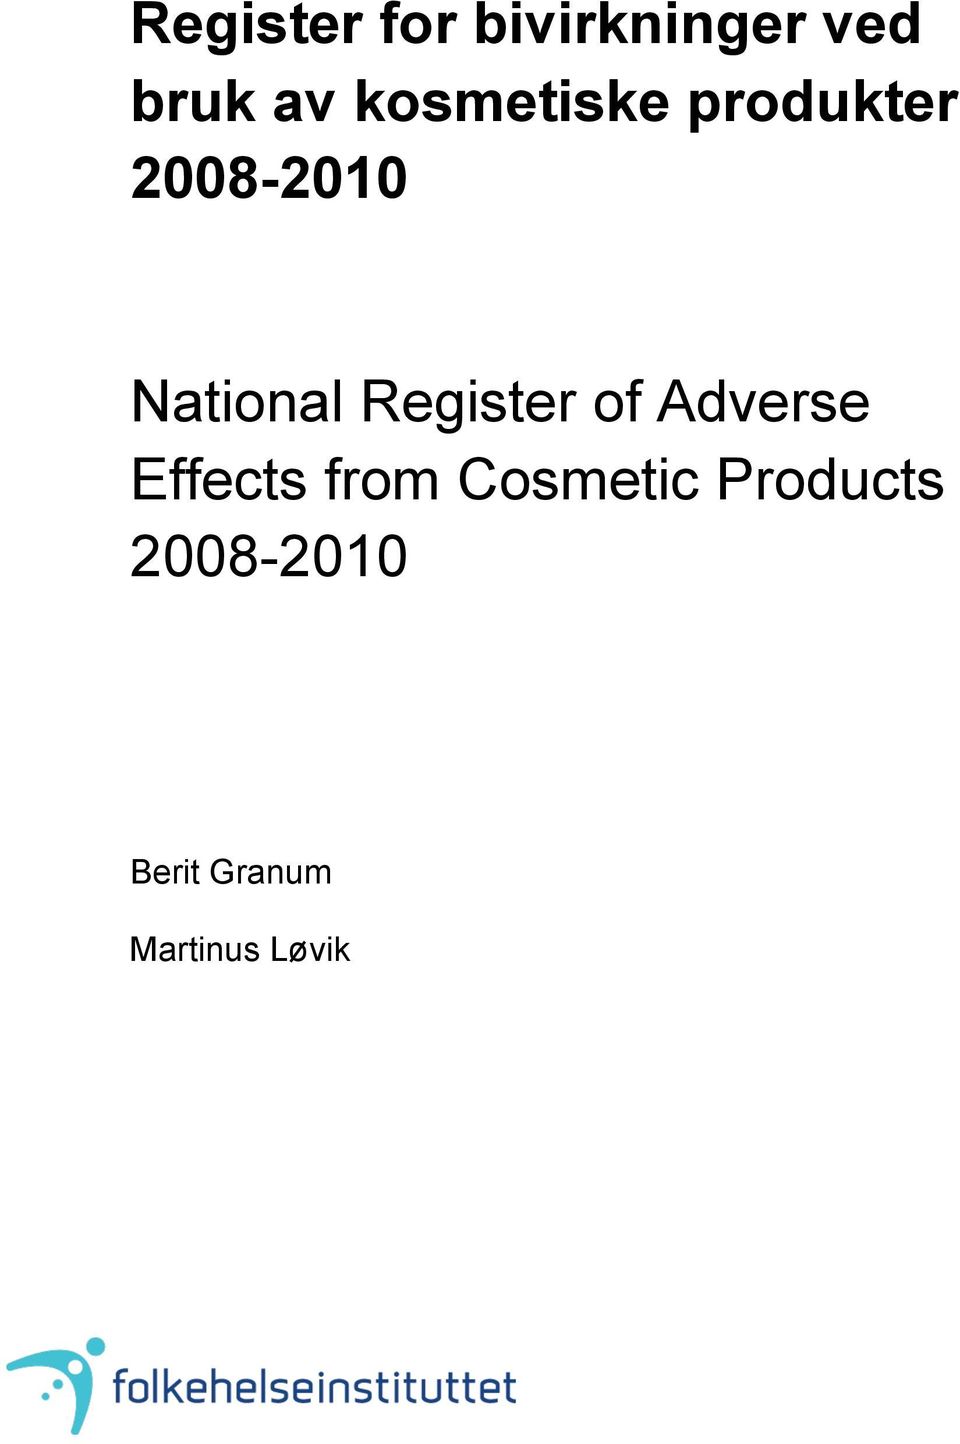 Register of Adverse Effects from Cosmetic